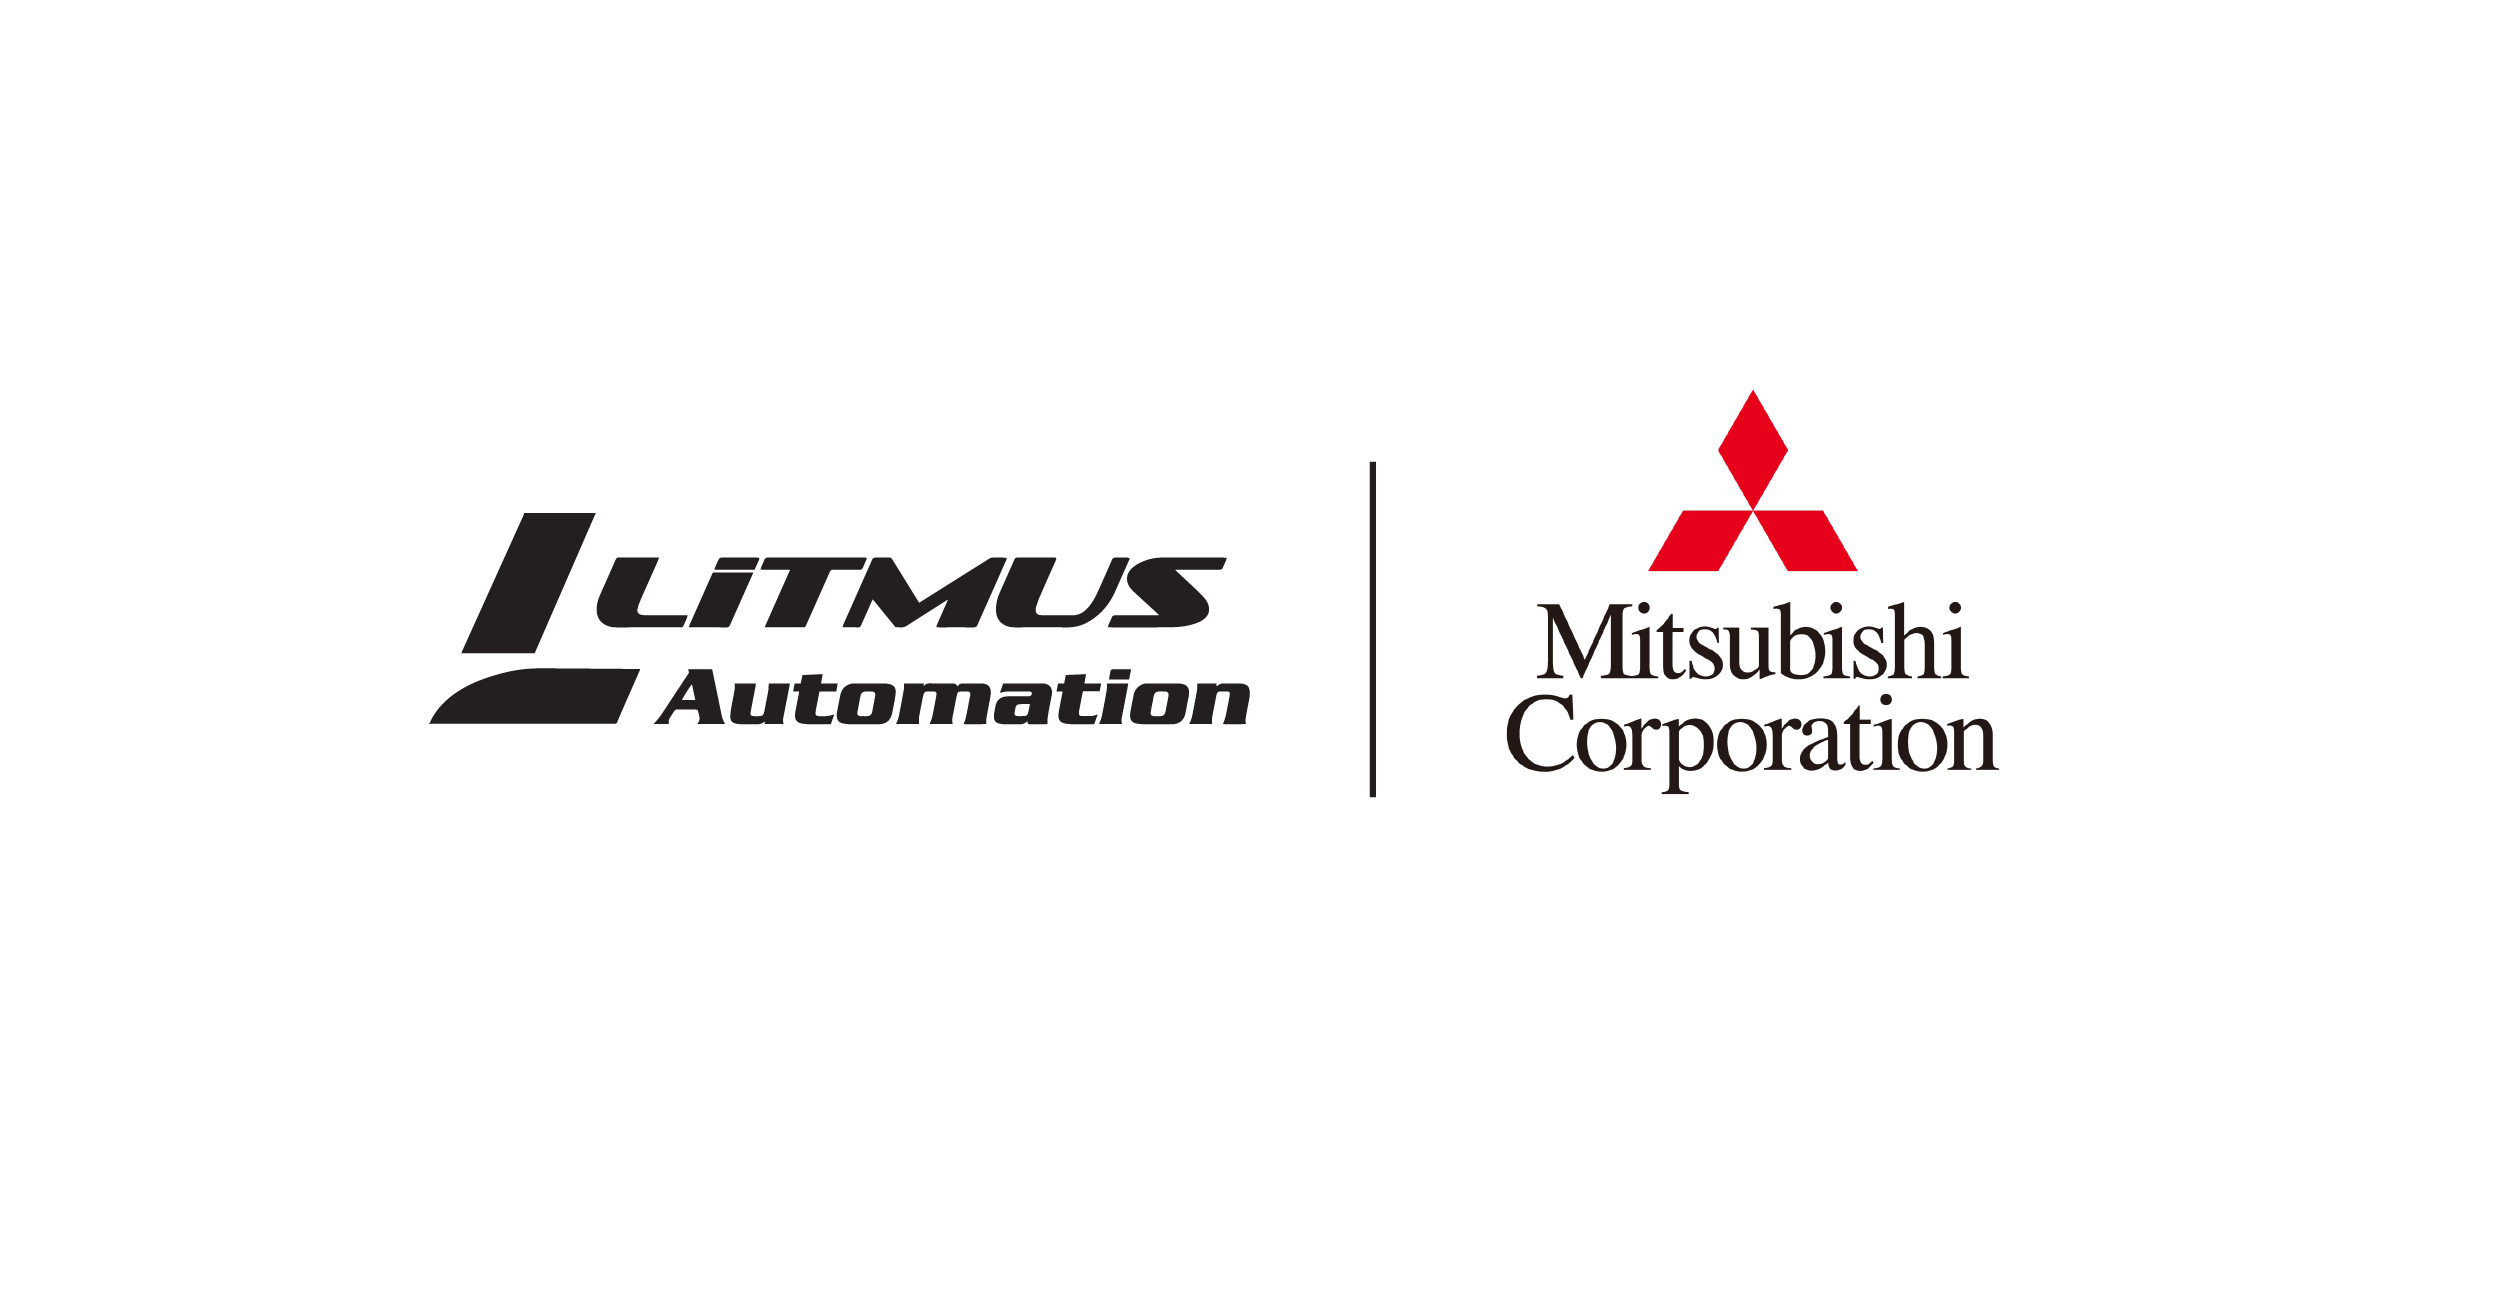 Litmus Automation, Wednesday, September 4, 2019, Press release picture